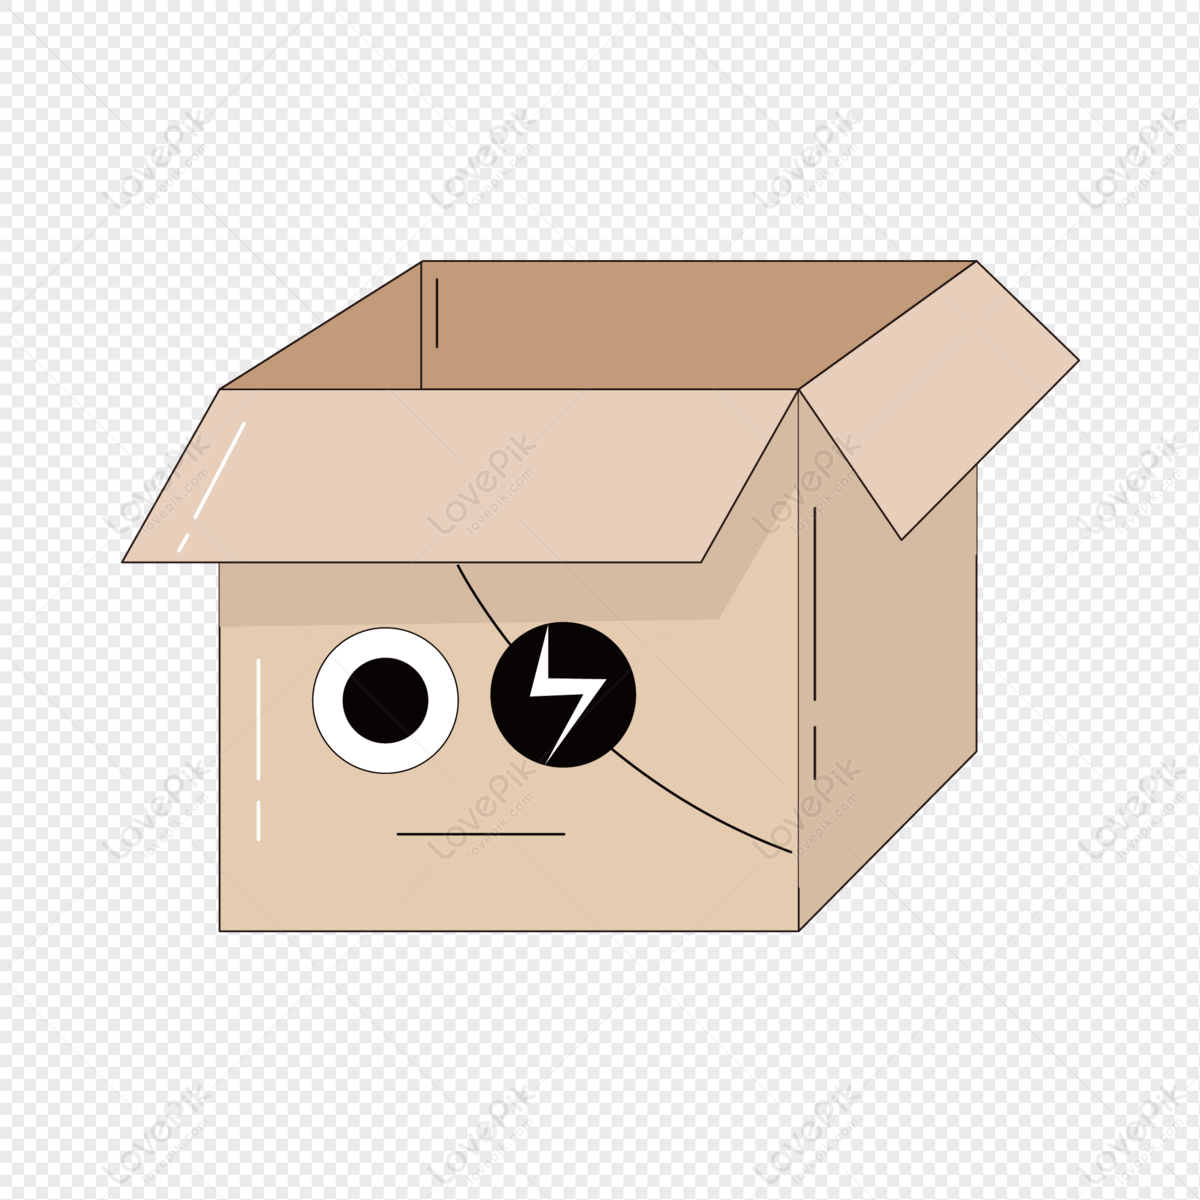 Carton Free PNG And Clipart Image For Free Download - Lovepik | 401708289